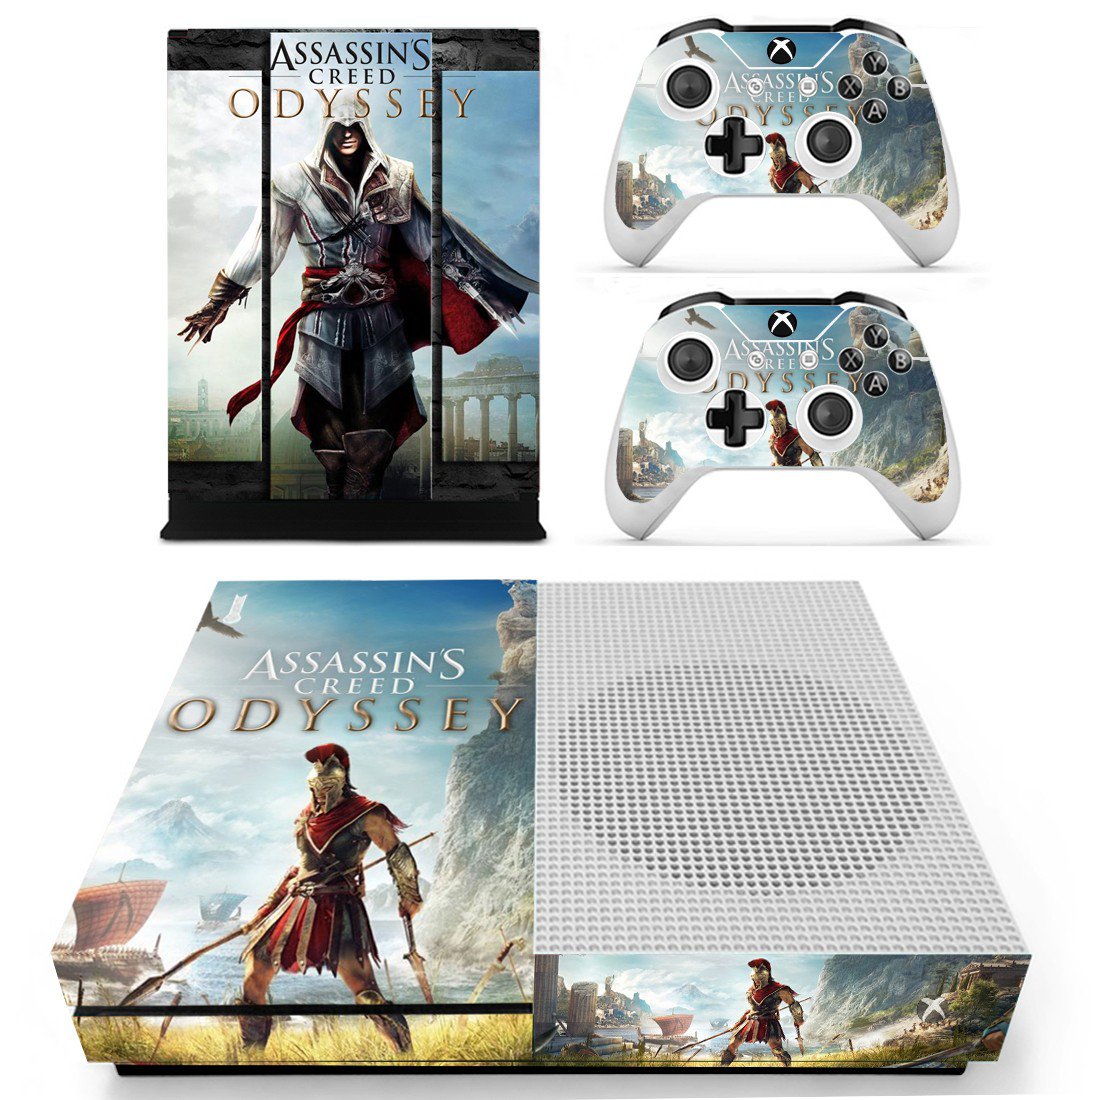 Assassin's Creed Odyssey Cover For Xbox One S Design 1